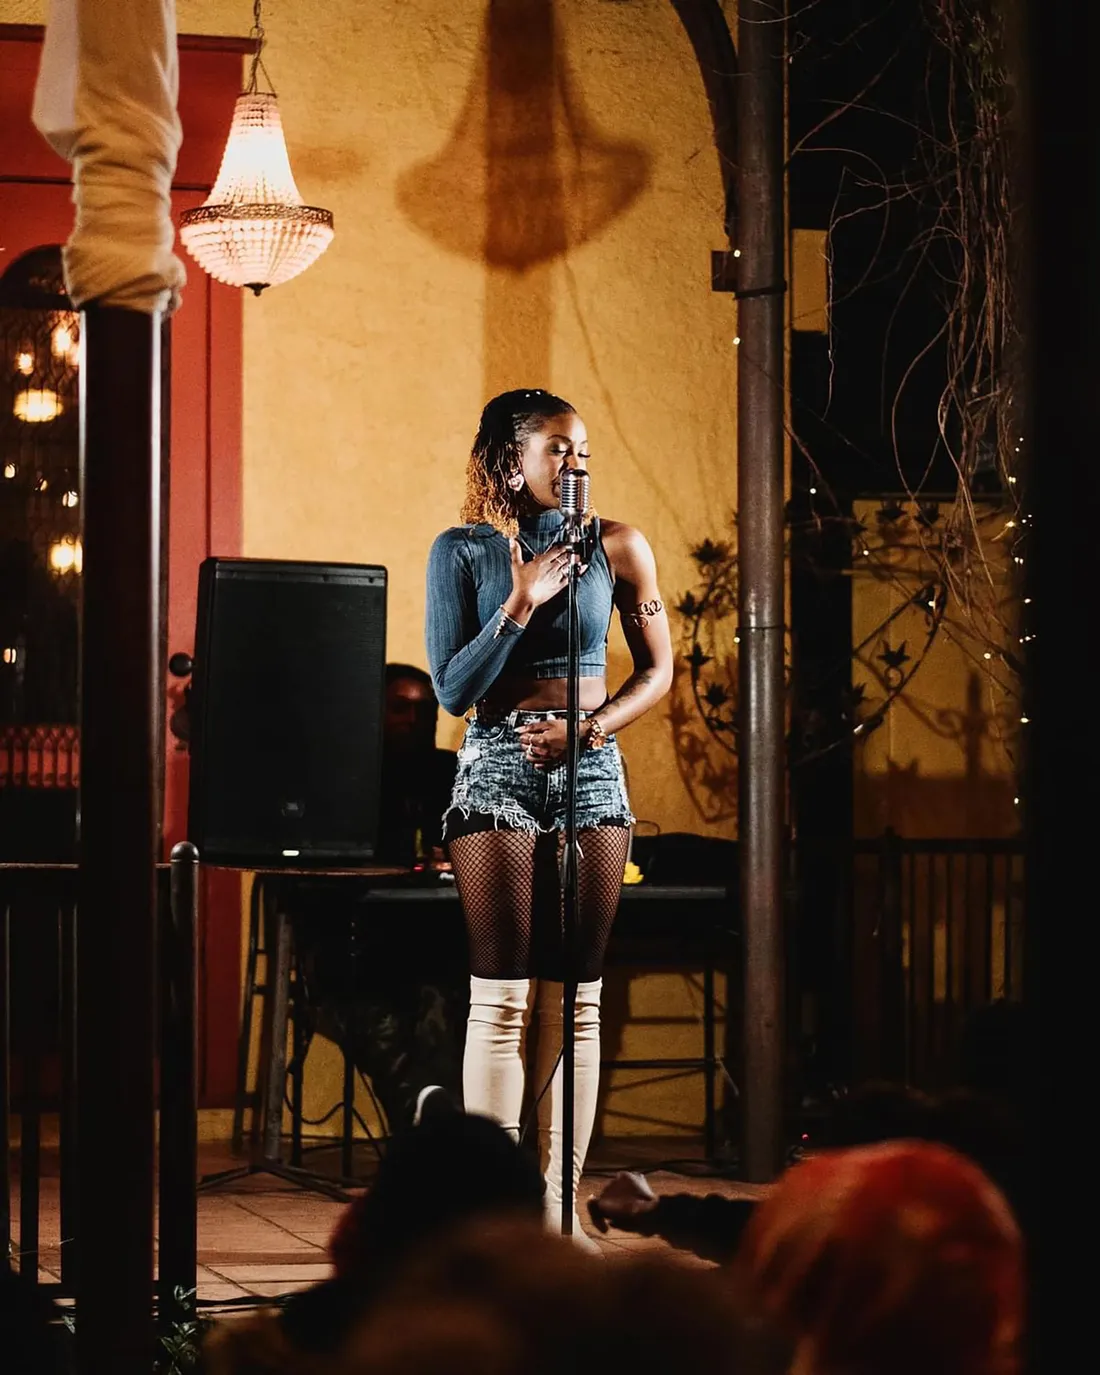 Imani Wallace on a stage performing.